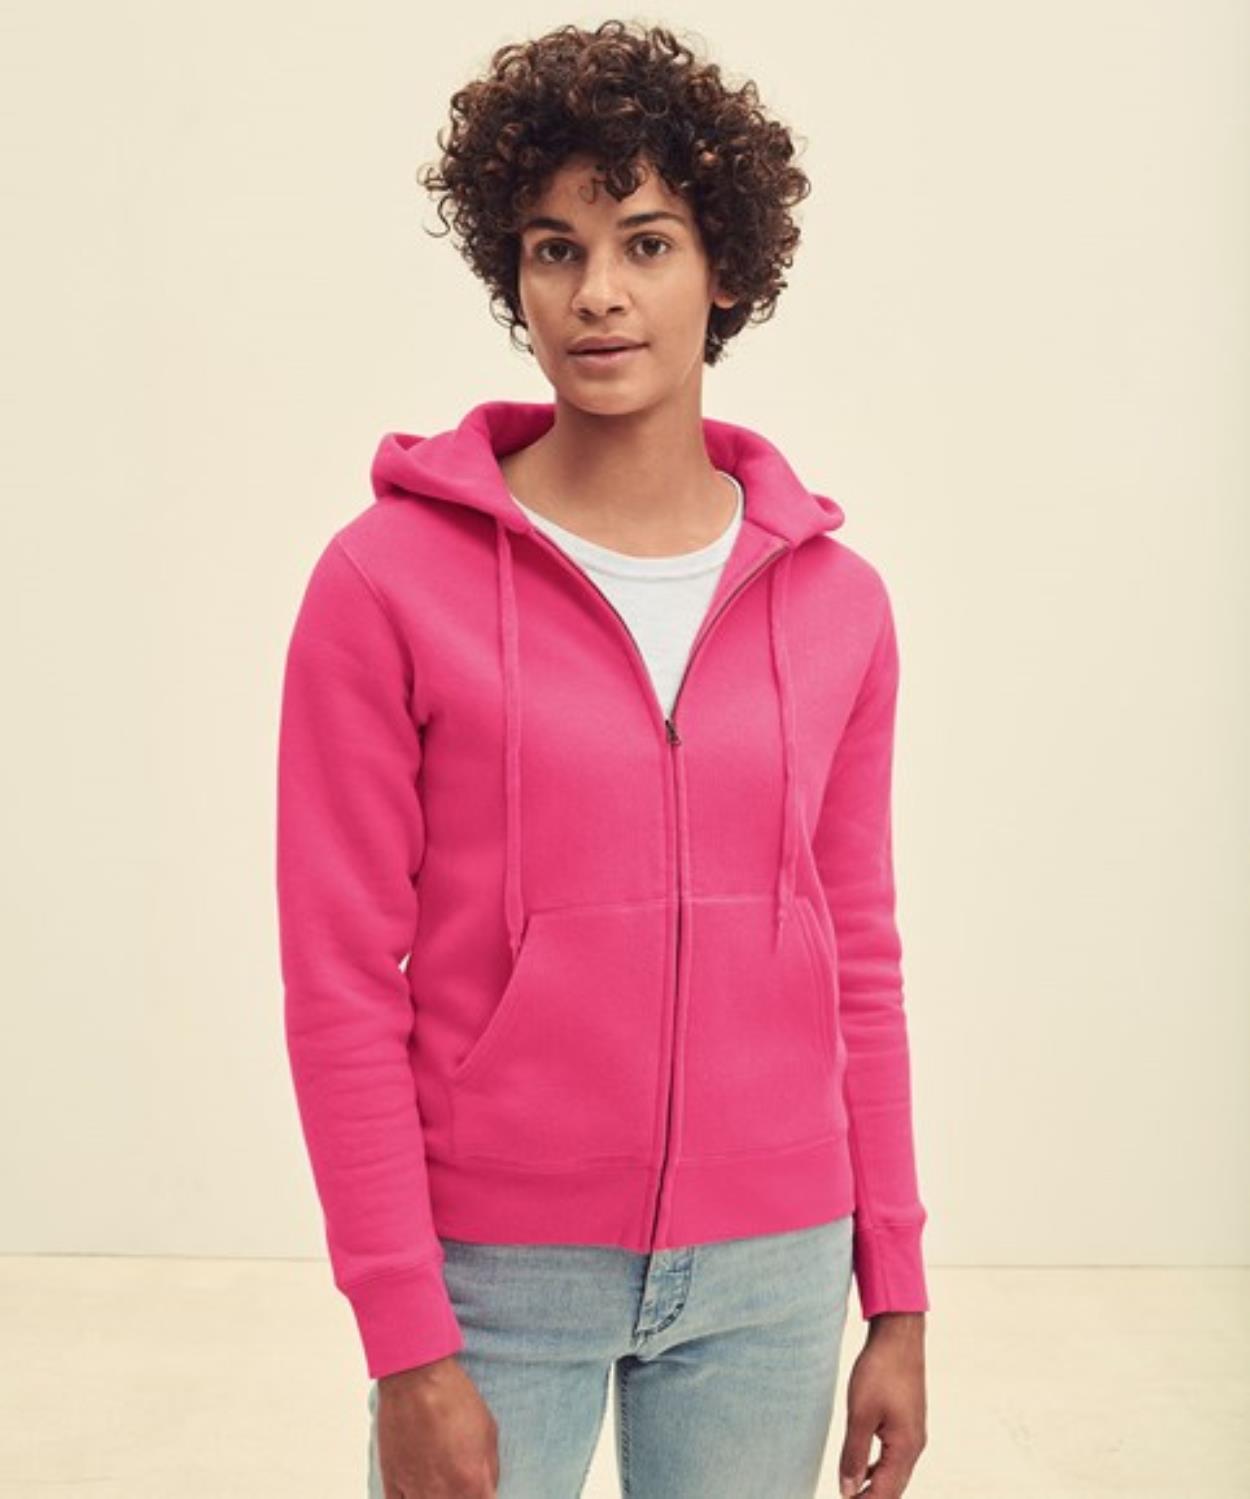 SS91 SS312 SS82 Lady-Fit Hooded Sweat Jacket Image 1